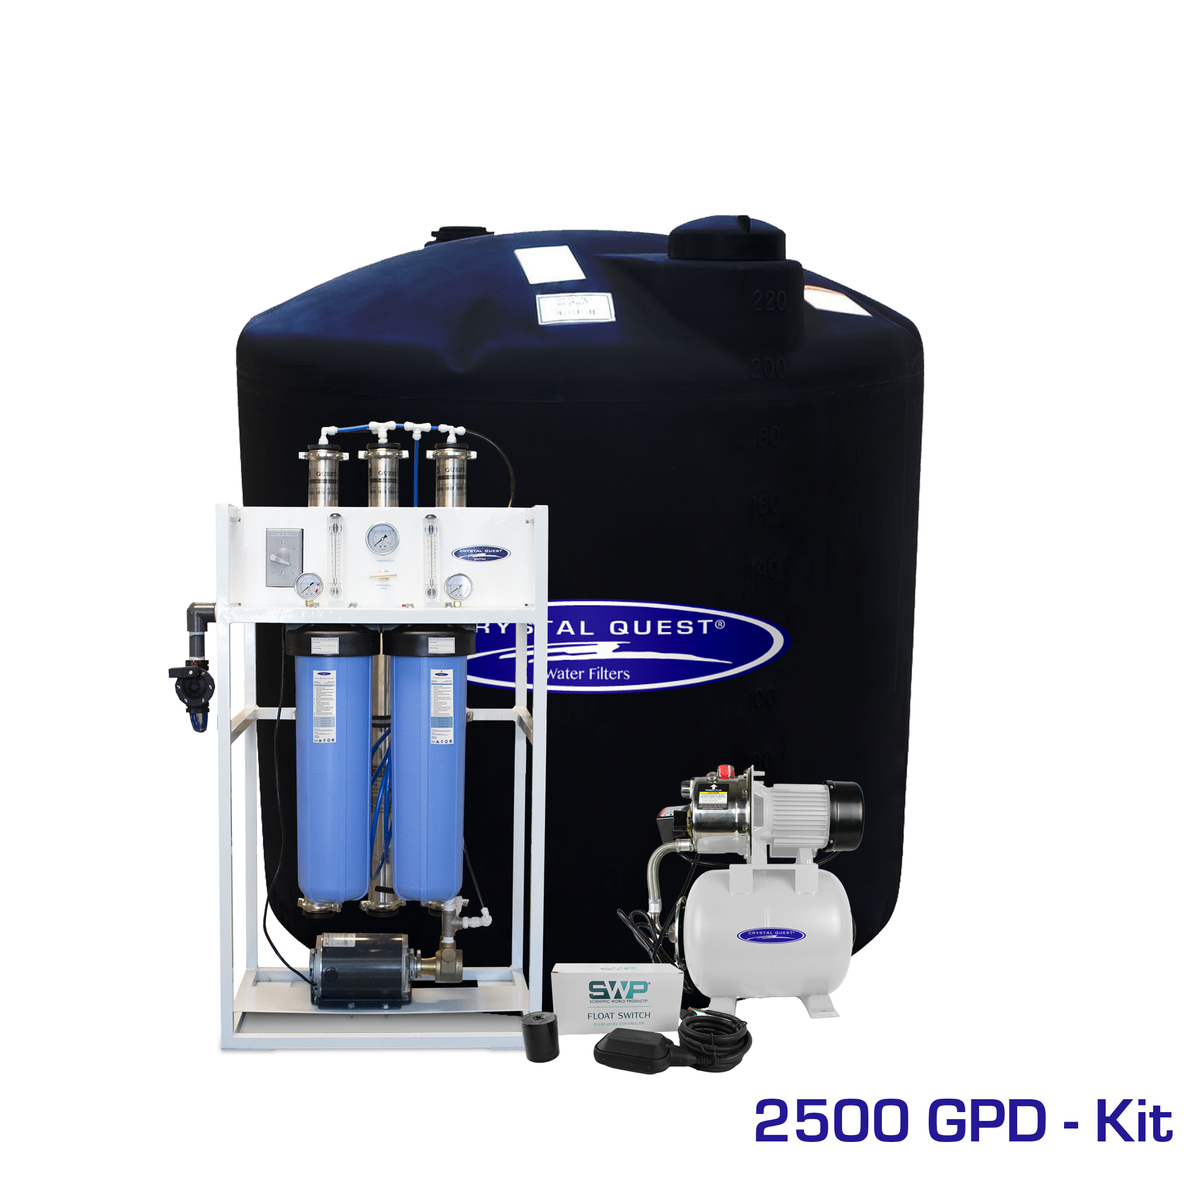 2,500 GPD / Add Storage Tank Kit (220 Gal) Medical Mid-Flow Reverse Osmosis System (500-7000 GPD) - Commercial - Crystal Quest